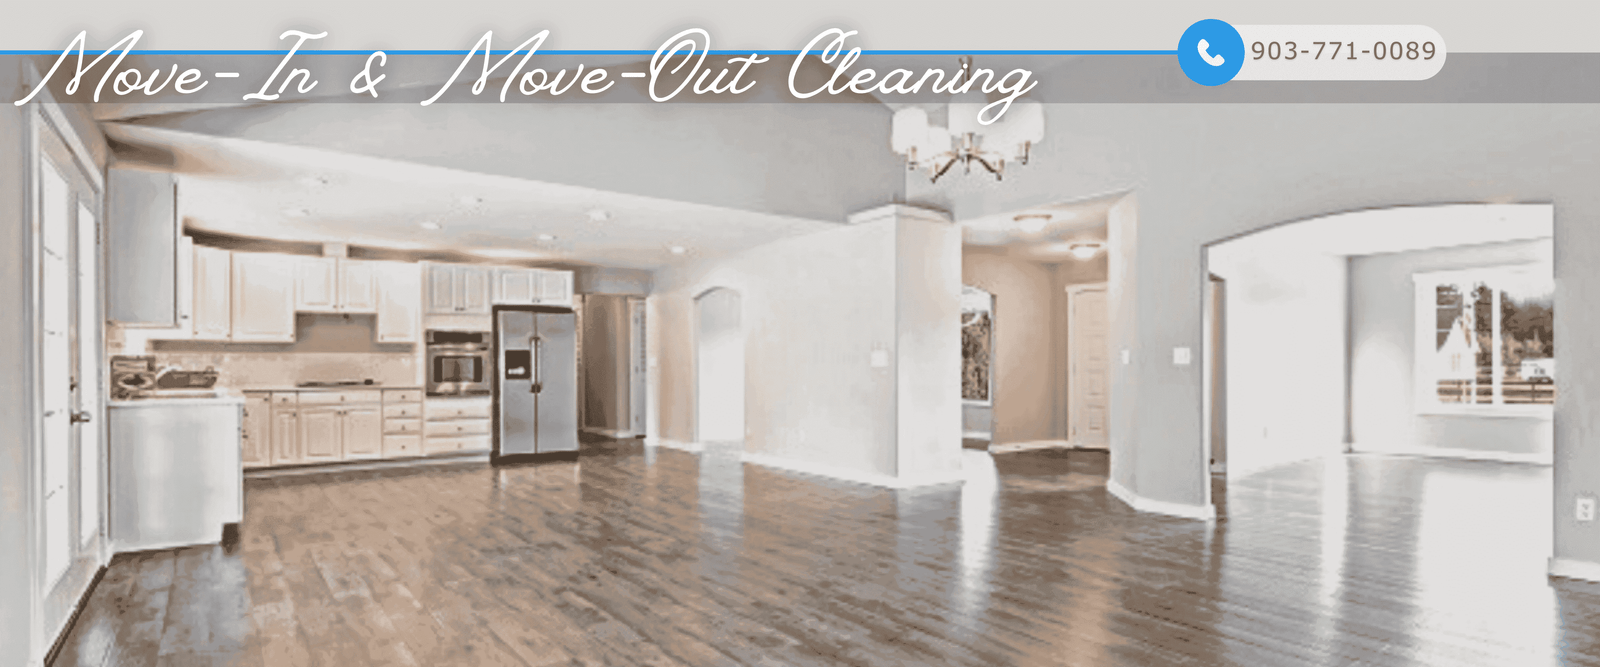 Move-in & Move-Out Cleaning Mone-in Cleaning Move-Out Cleaning